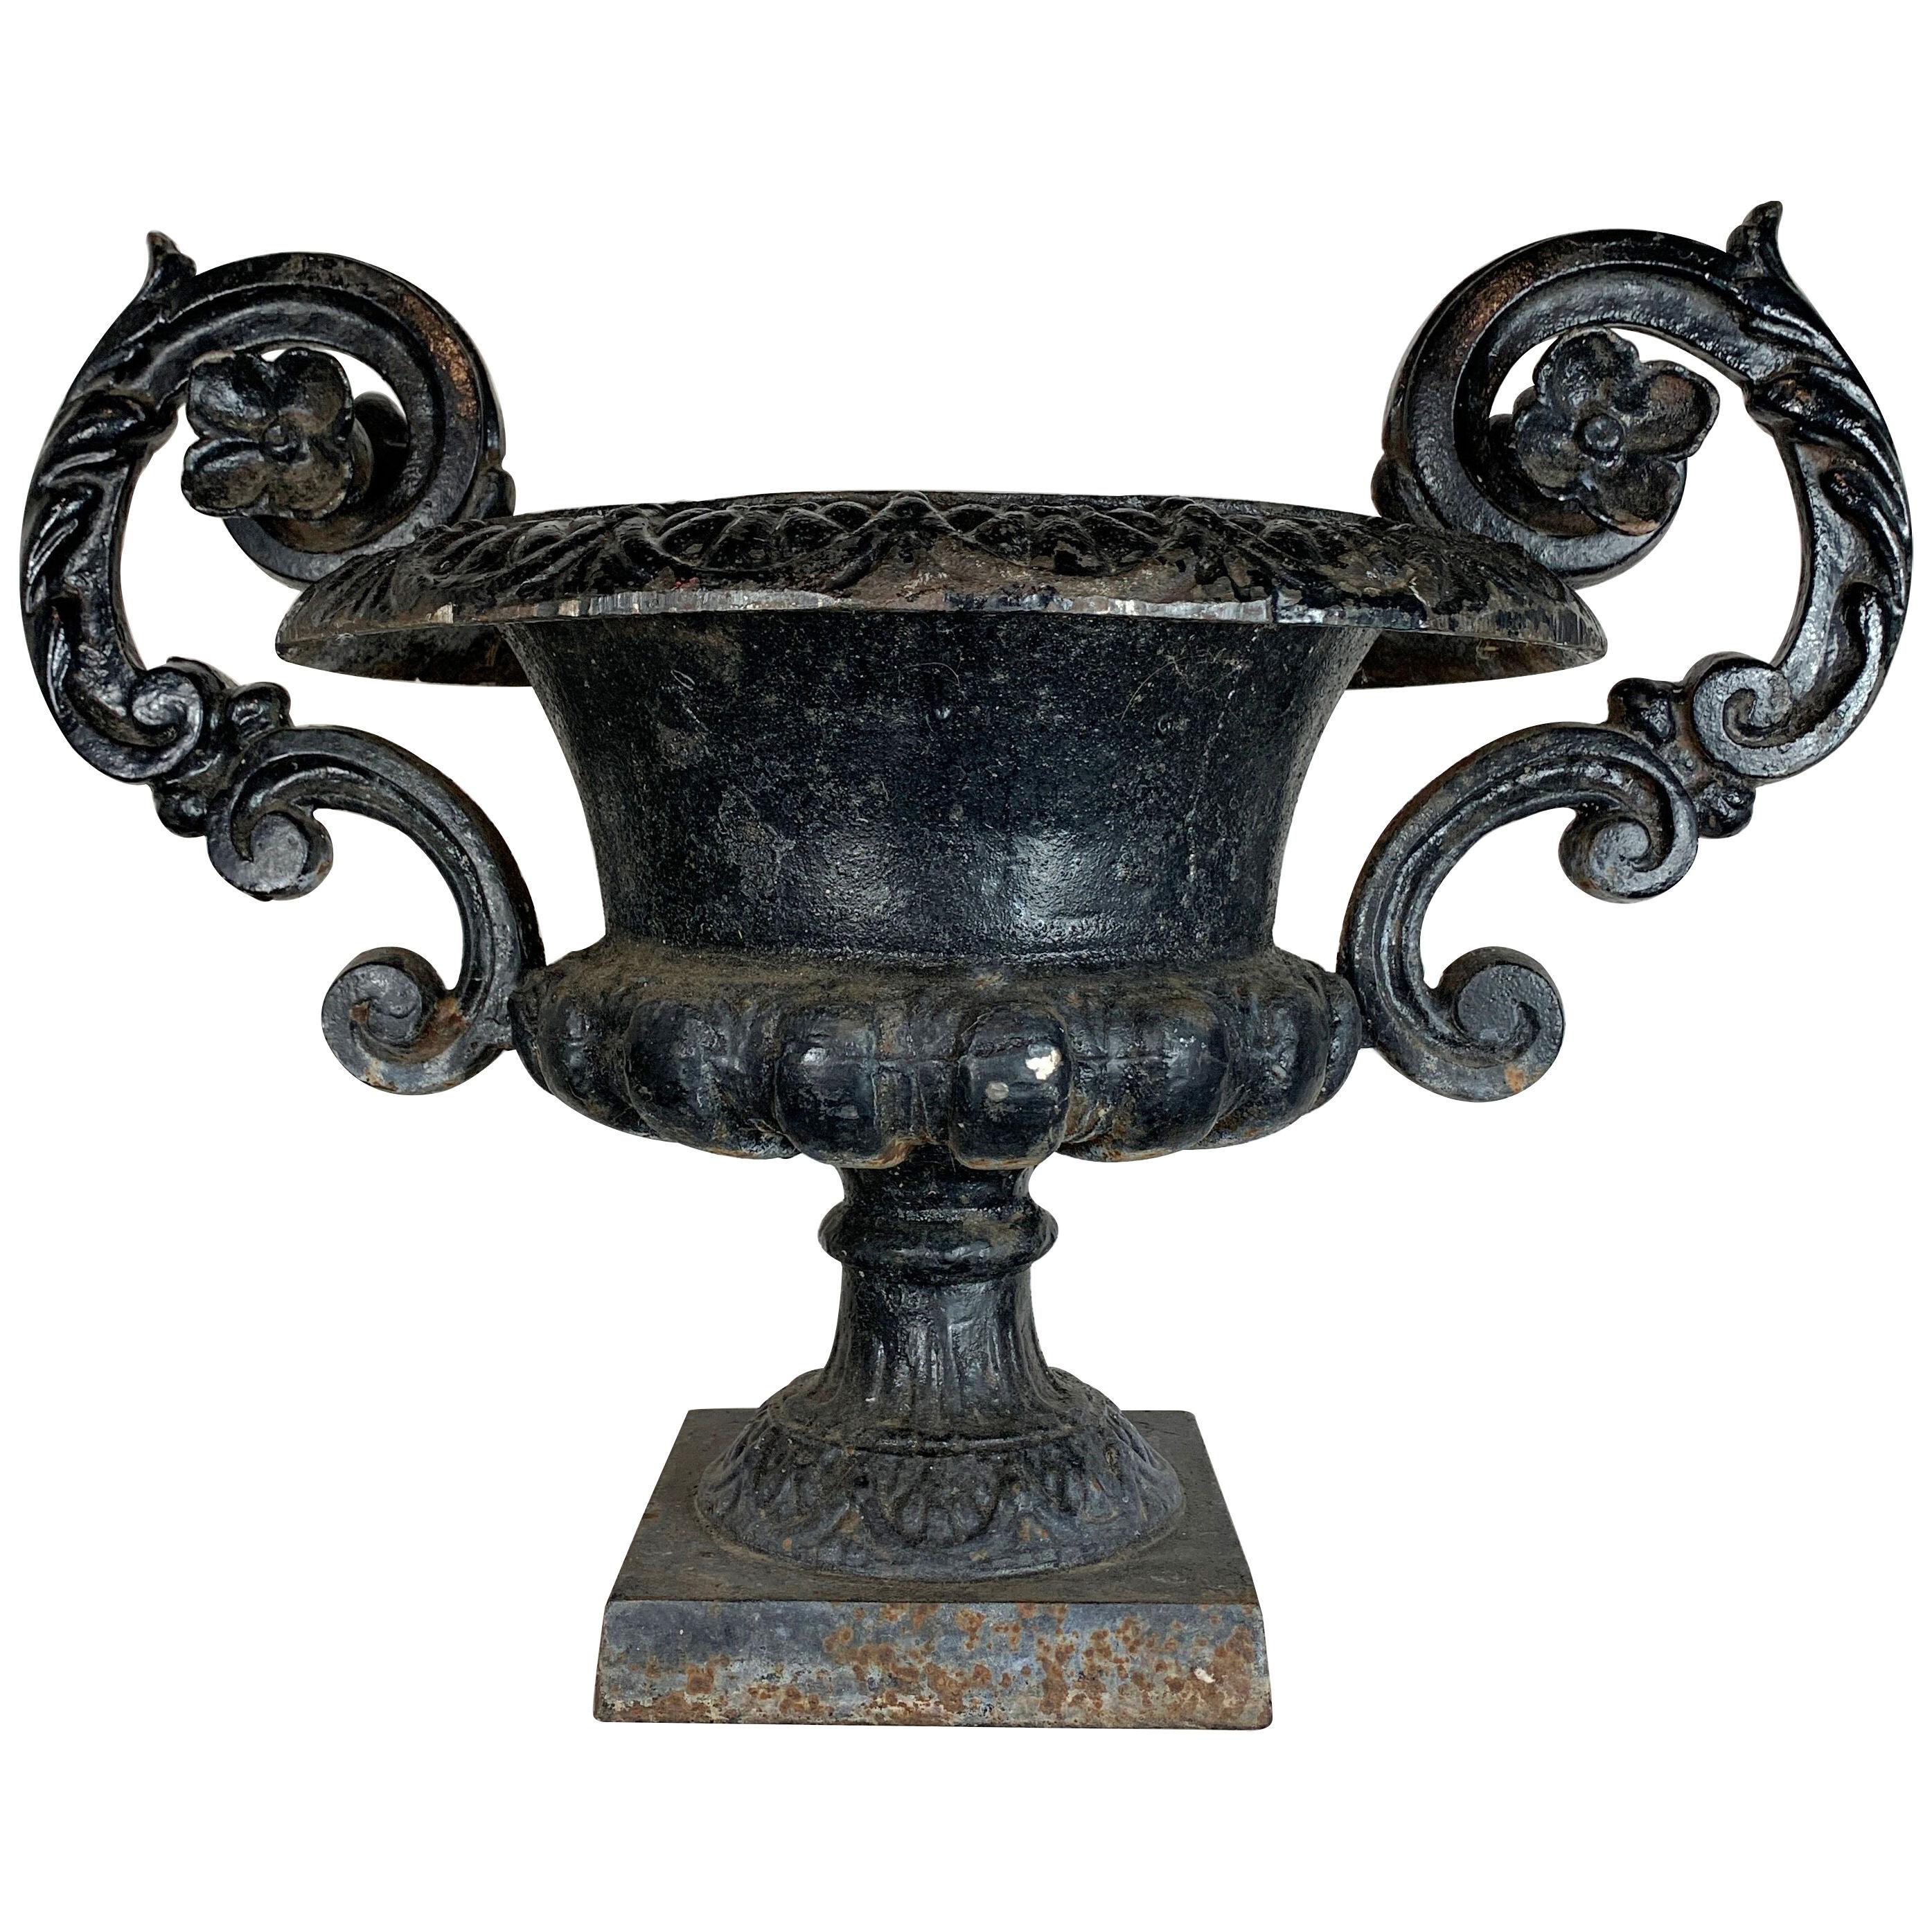  Antique French Cast Iron Urn with Decorative Handles